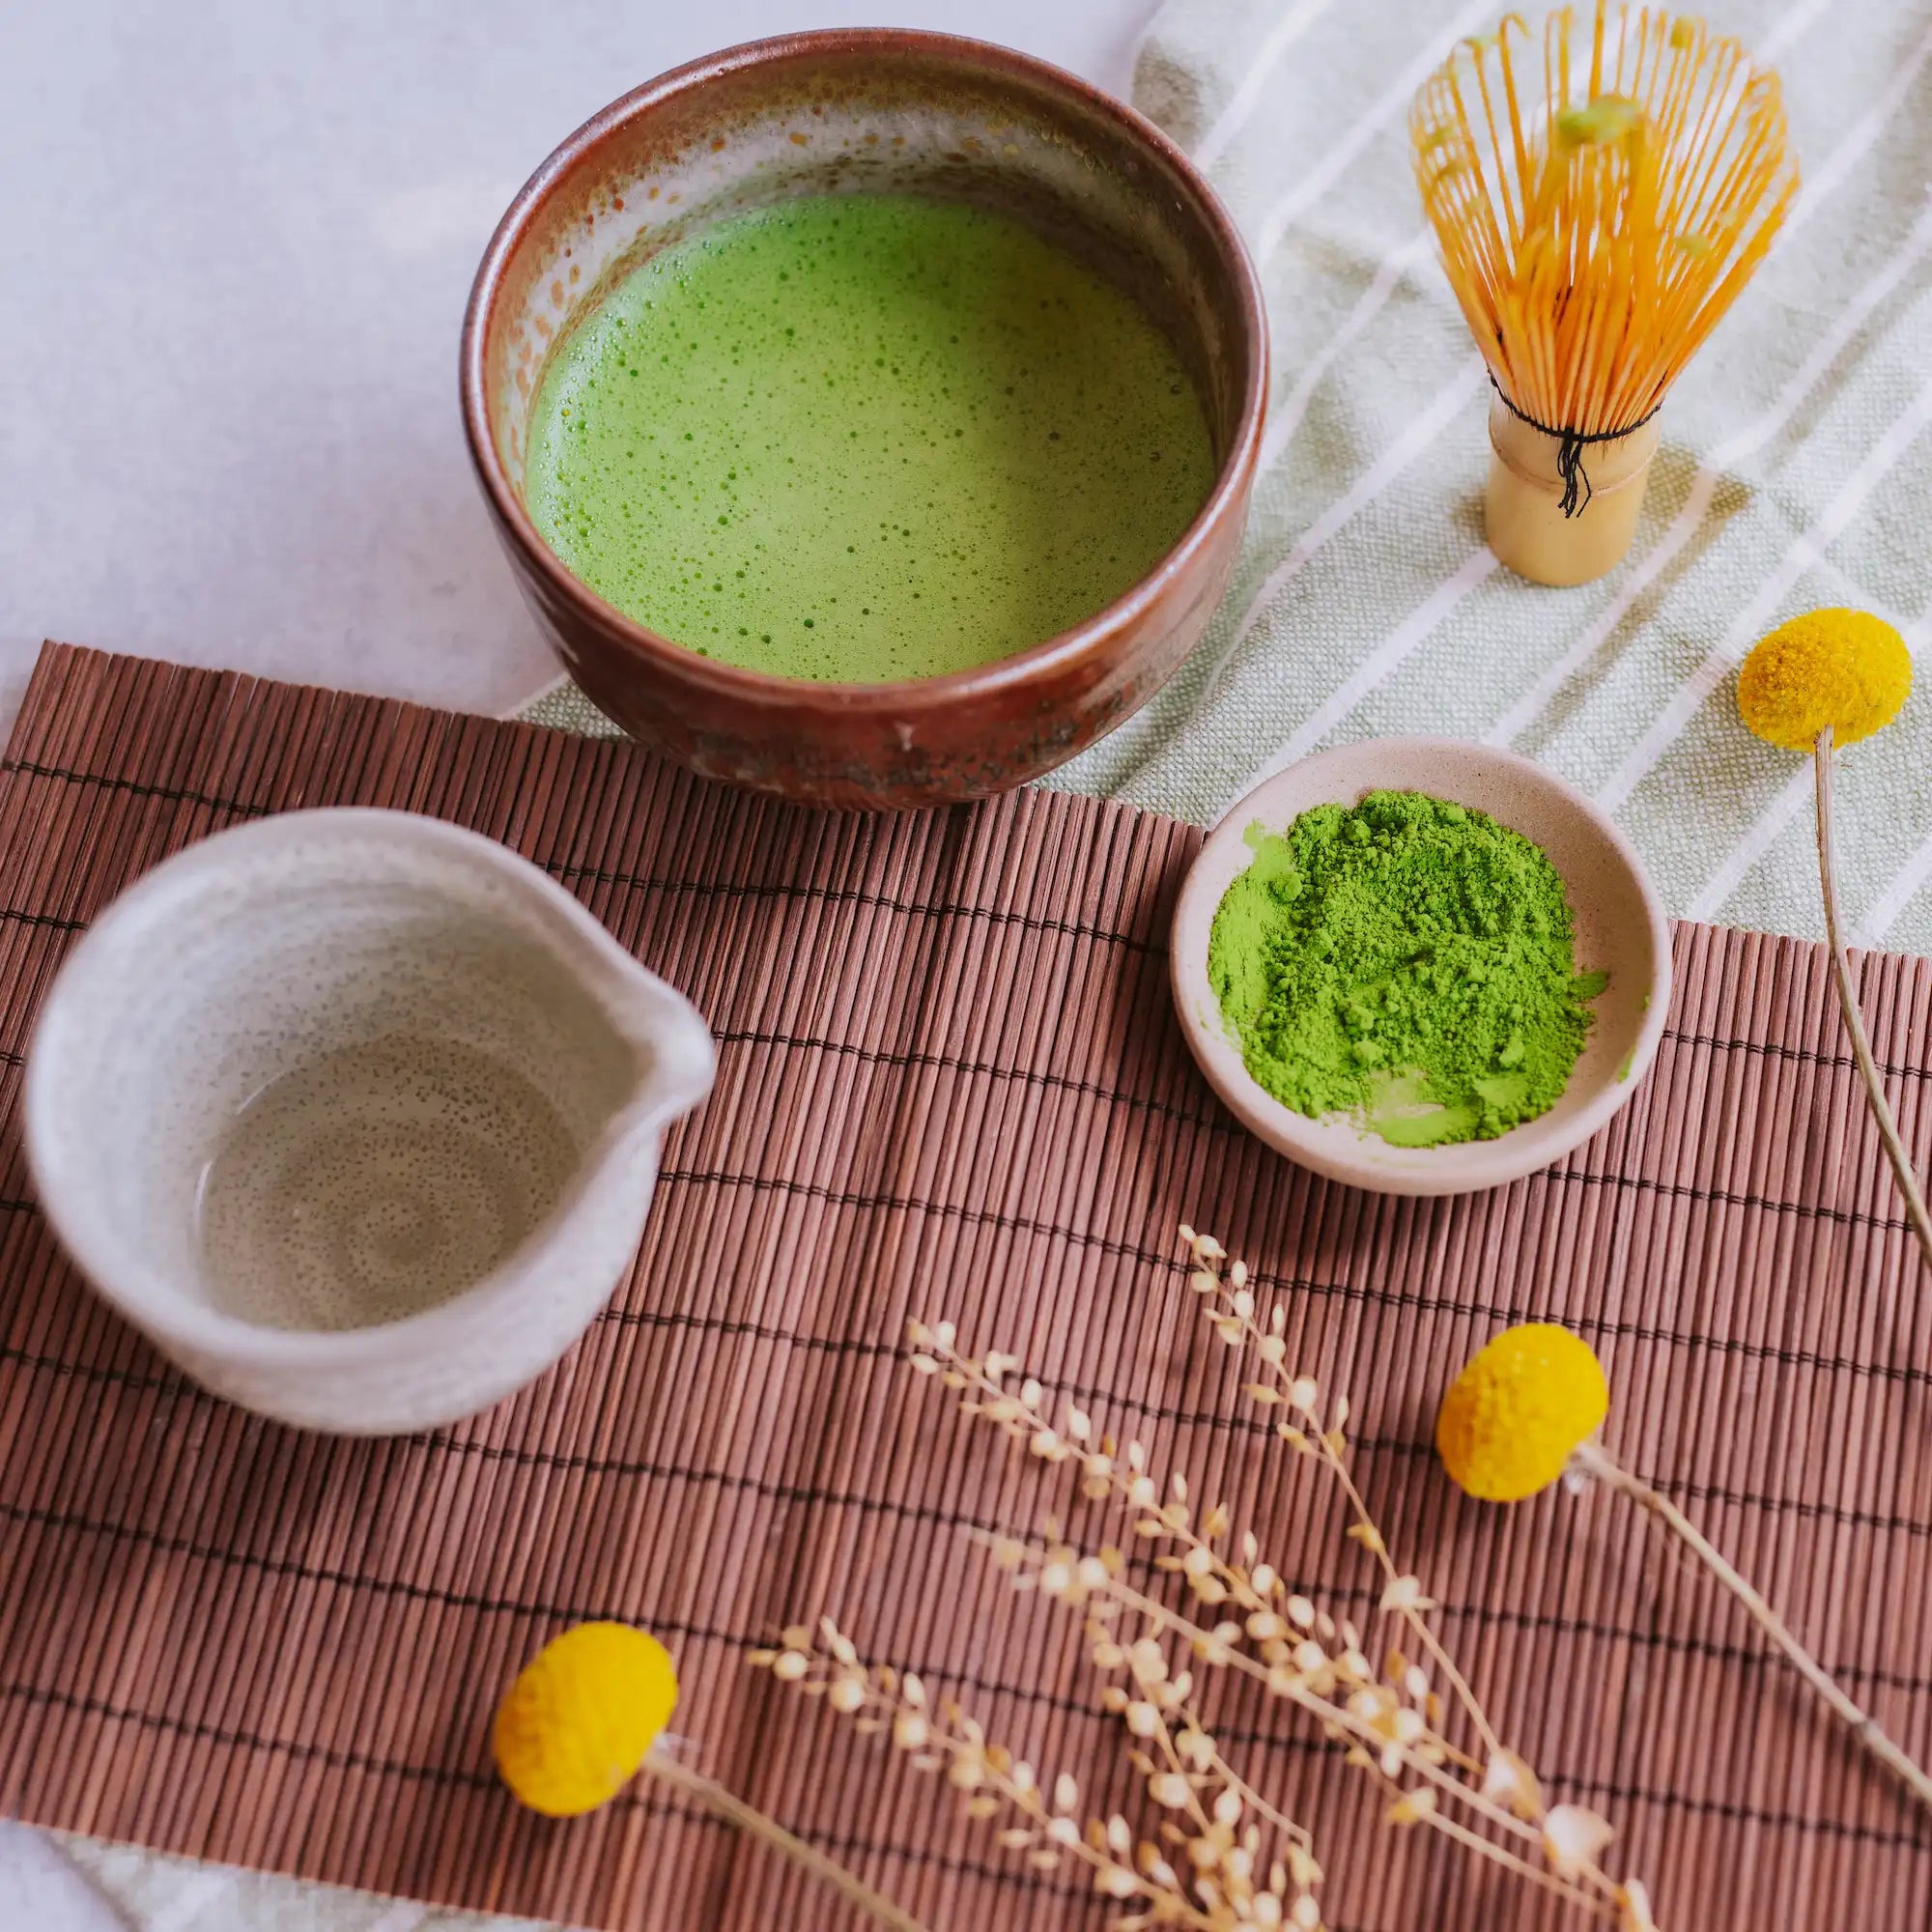 flay lay of whisked matcha in a hand-thrown matcha bowl with a dish of matcha powder on tatami mats with dried florals